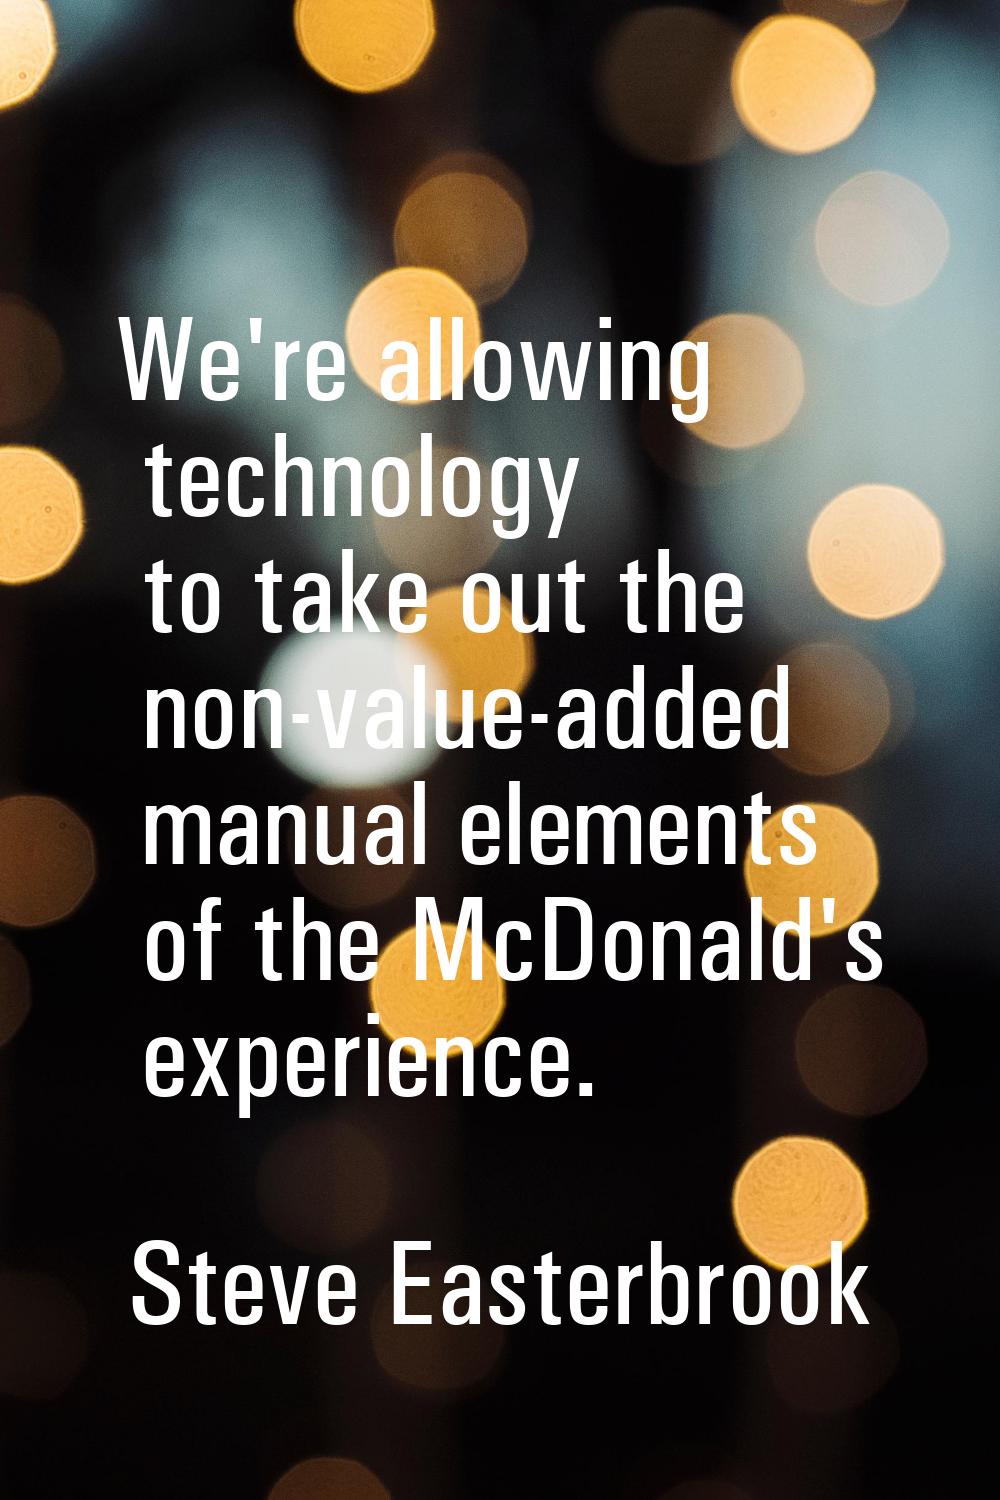 We're allowing technology to take out the non-value-added manual elements of the McDonald's experie